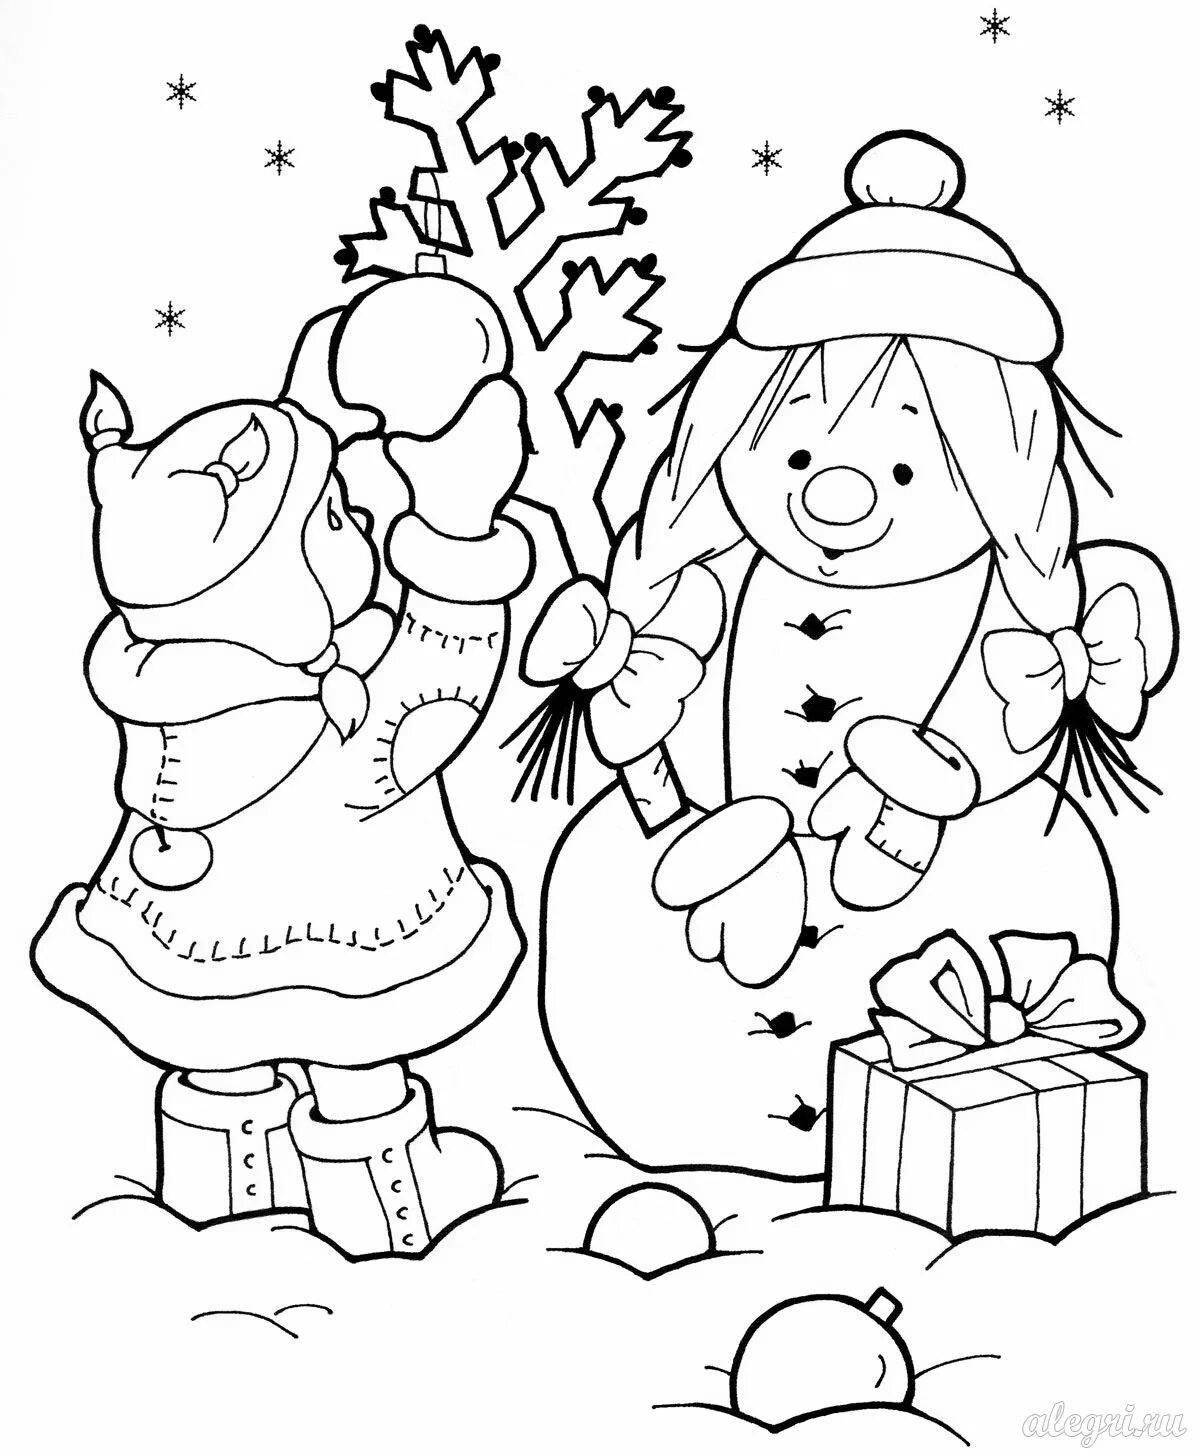 Fantastic winter coloring book for 4 year olds